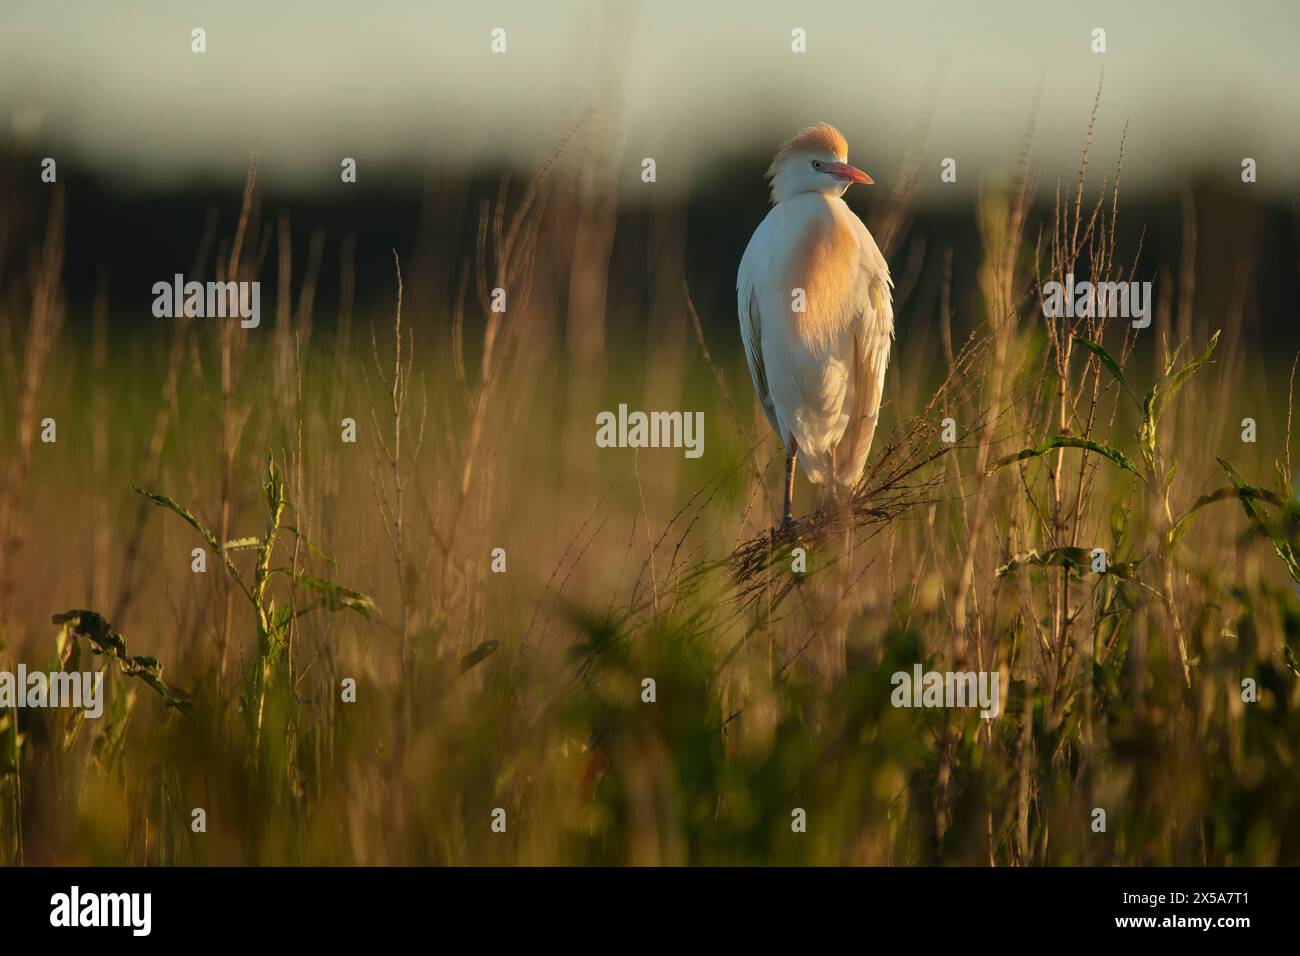 A Cattle Egret stands gracefully amidst the tall grass, bathed in the warm light of the golden hour, exuding a sense of peace in its natural habitat Stock Photo